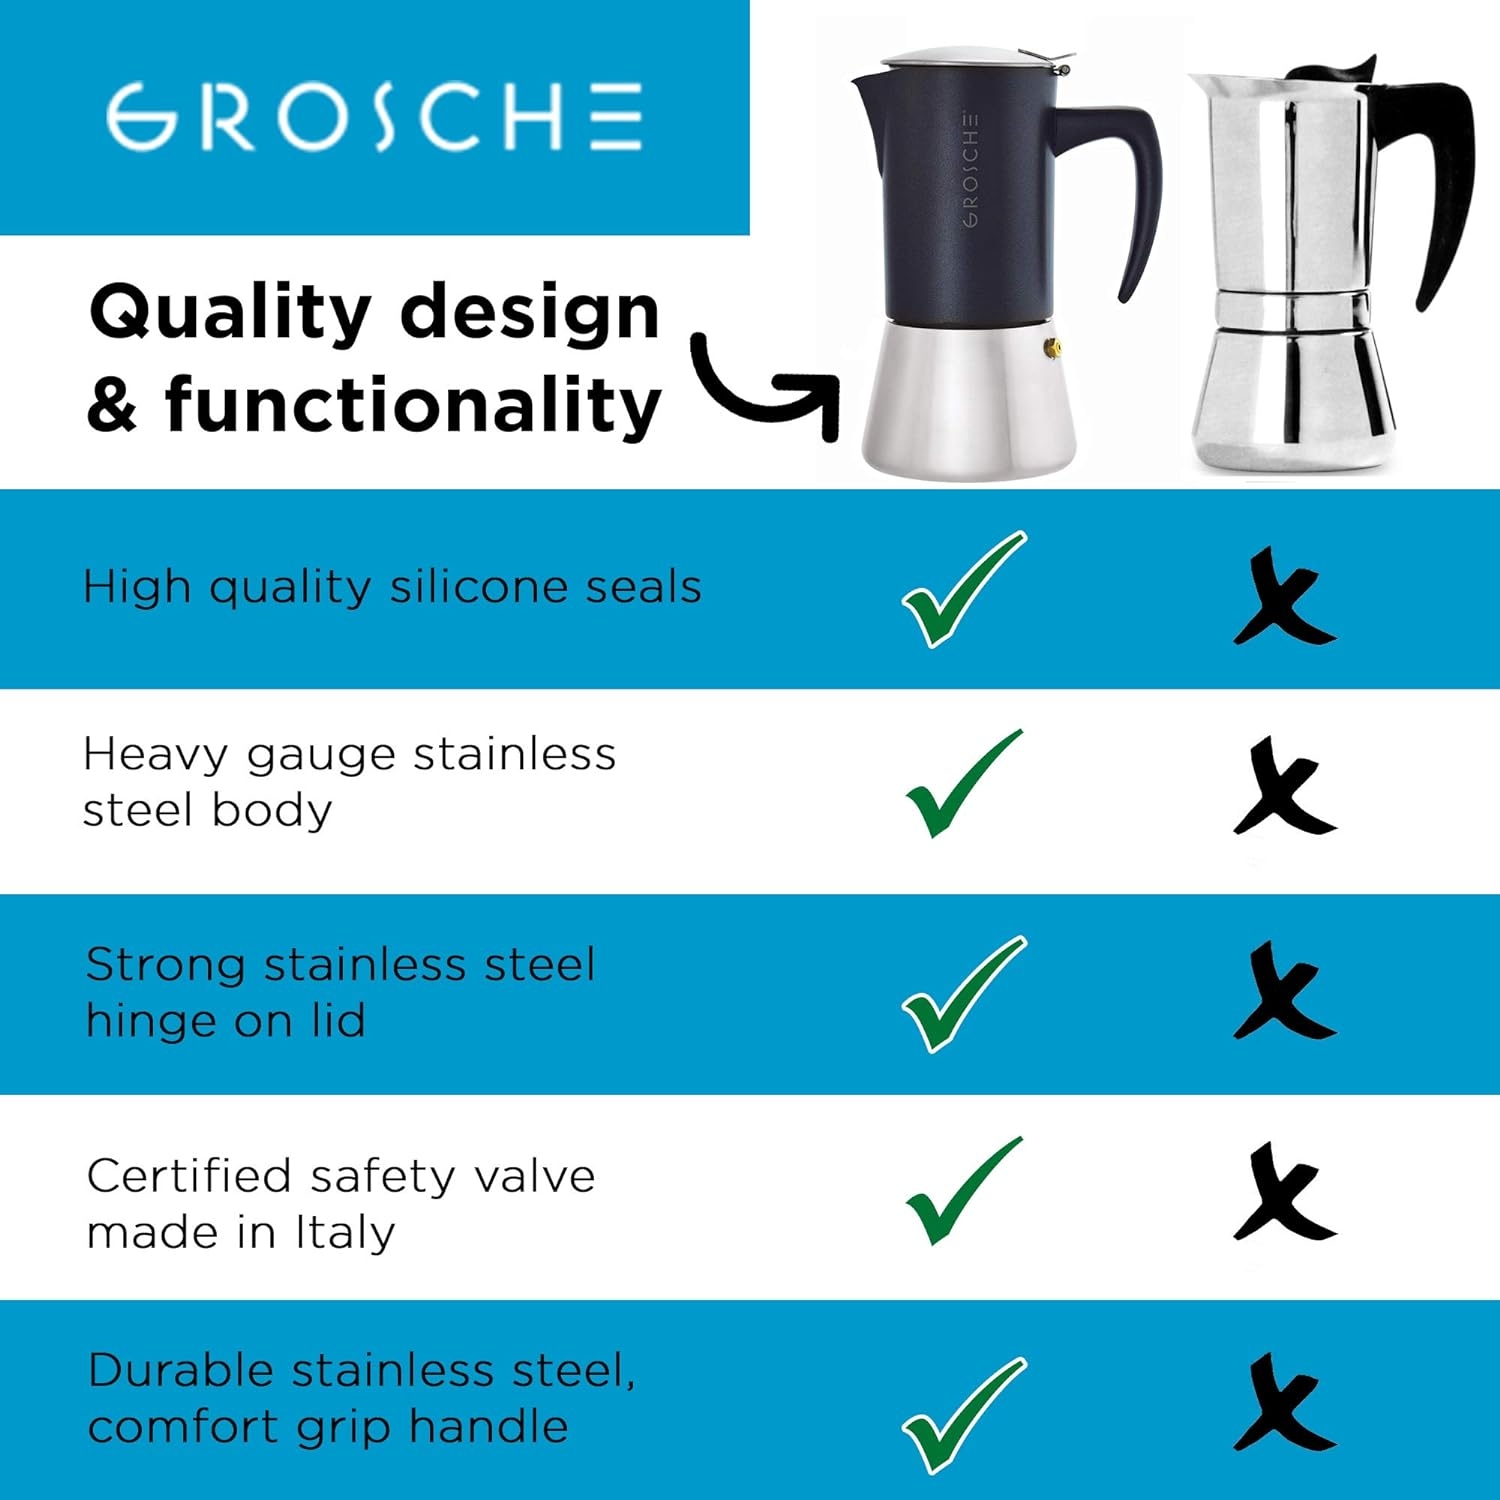 GROSCHE Milano Steel 6 espresso cup Stainless Steel Stovetop Espresso Maker Moka pot - Cuban Coffee maker Italian Espresso Greca coffee maker for Induction gas or electric stoves